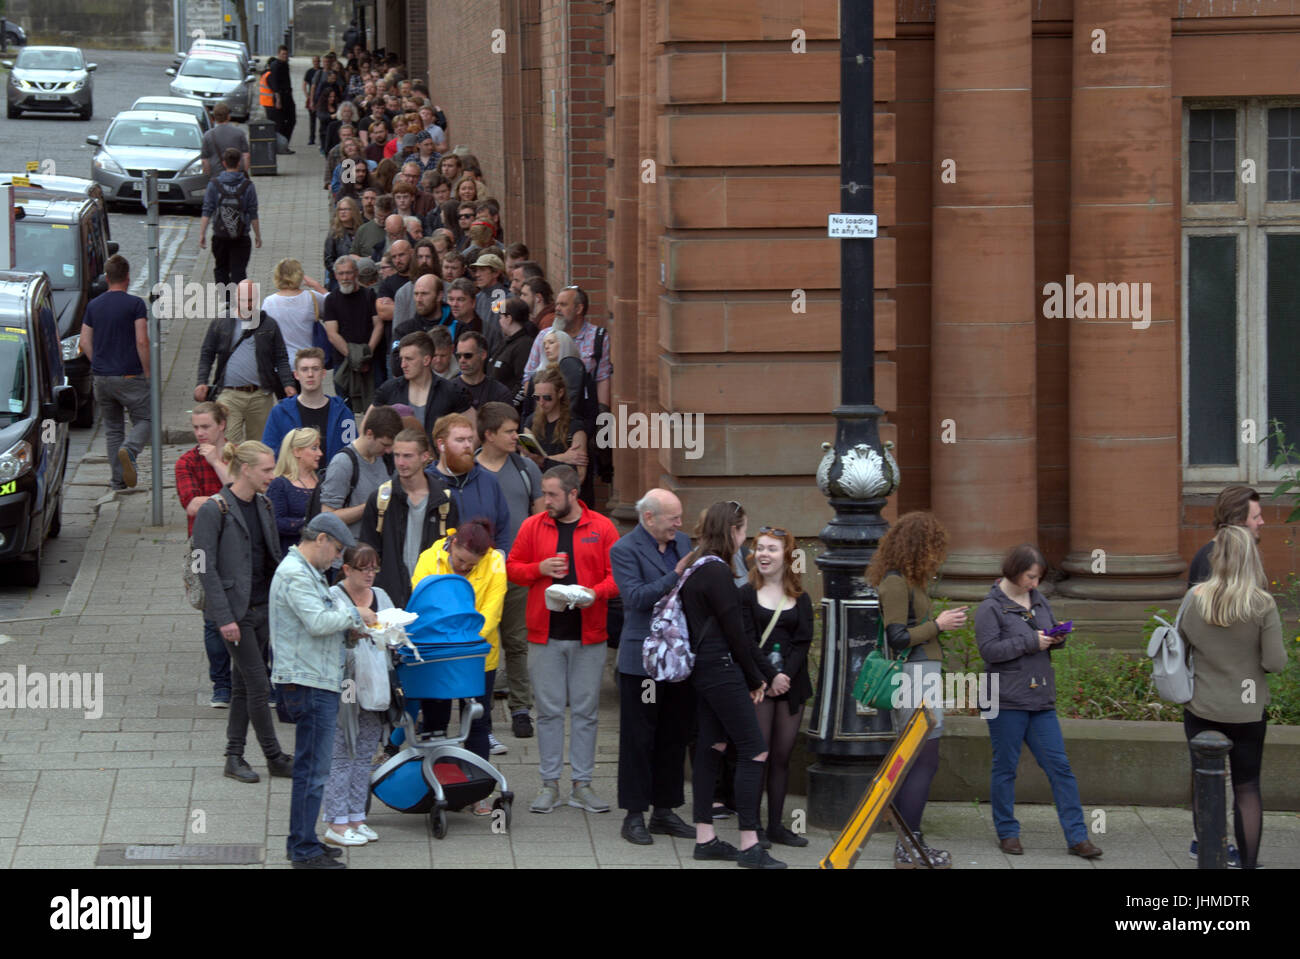 Glasgow, Scotland, UK. 14th July. Long queues in Glasgow for a film as casting for extras rakes place at the city's Kelvin Hall. The movie based on Robert the Bruce gave preference for beards though both men and women were required. The length of the queie caused a stir locally and one musician decided to come back tomorrow on his bike for the second day of casting hoping it had gone down by then. Credit Gerard Ferry/Alamy news Stock Photo